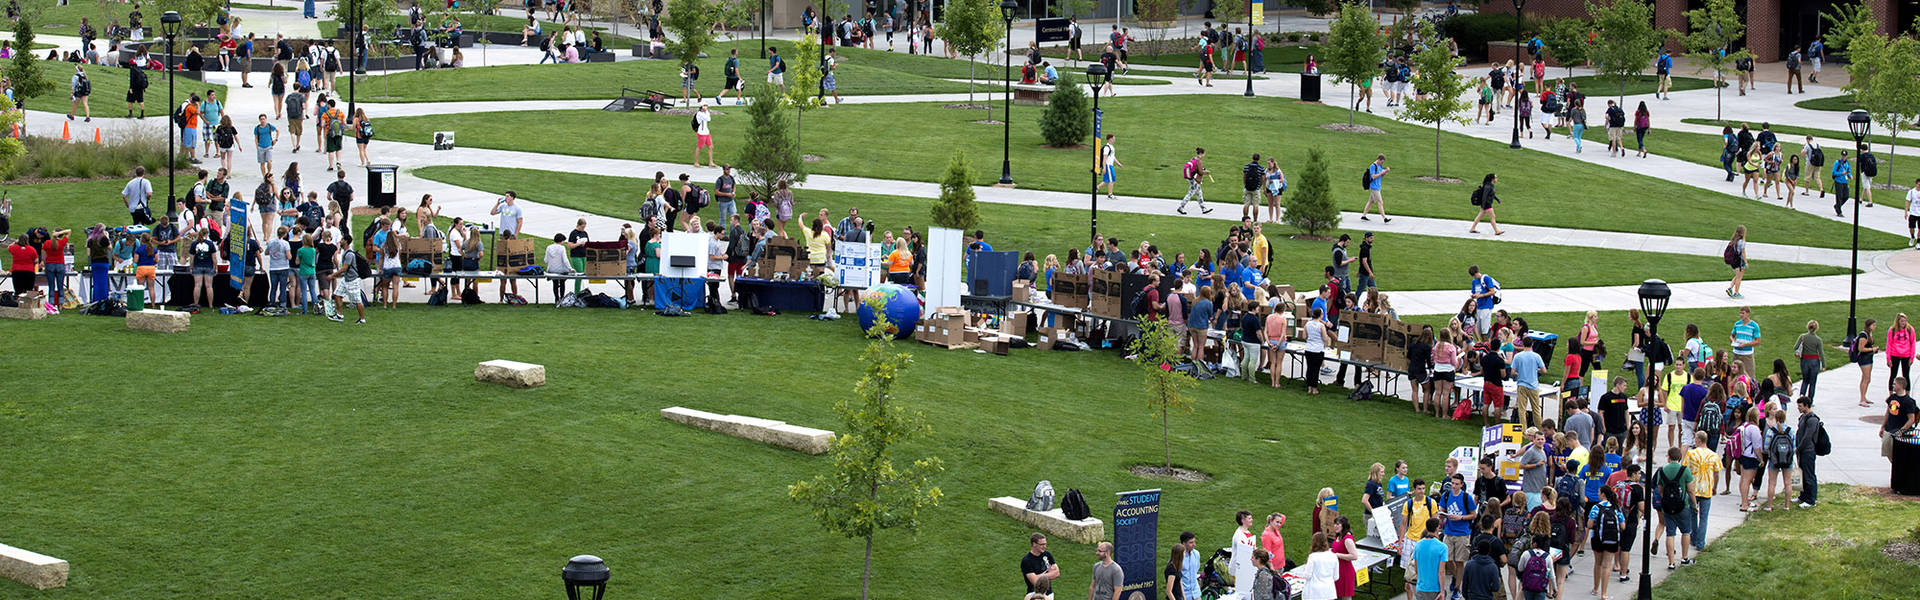 Overview of students at the Blugold Organization Bash